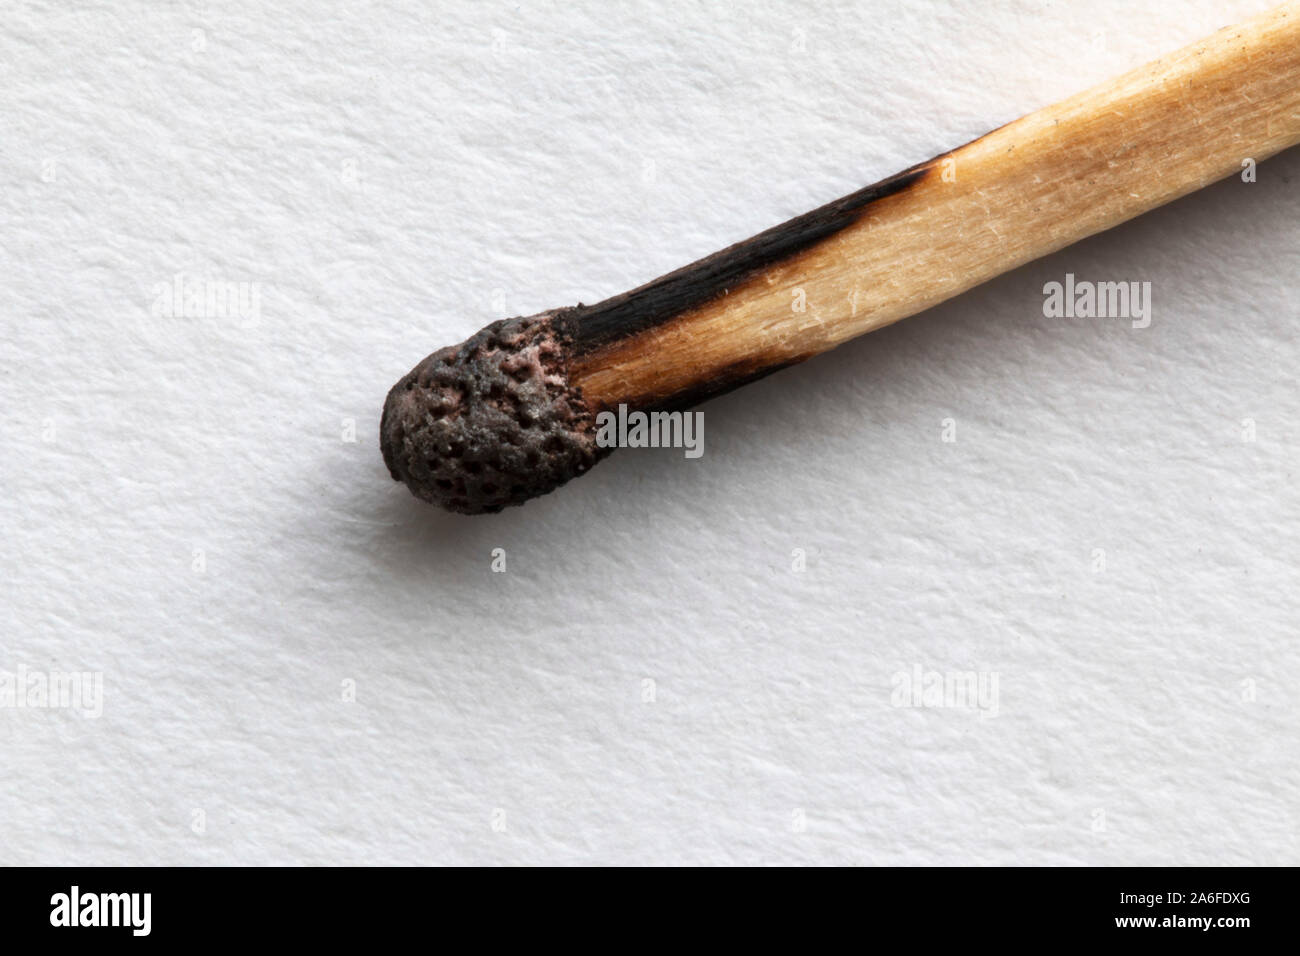 A used match on a white background Stock Photo